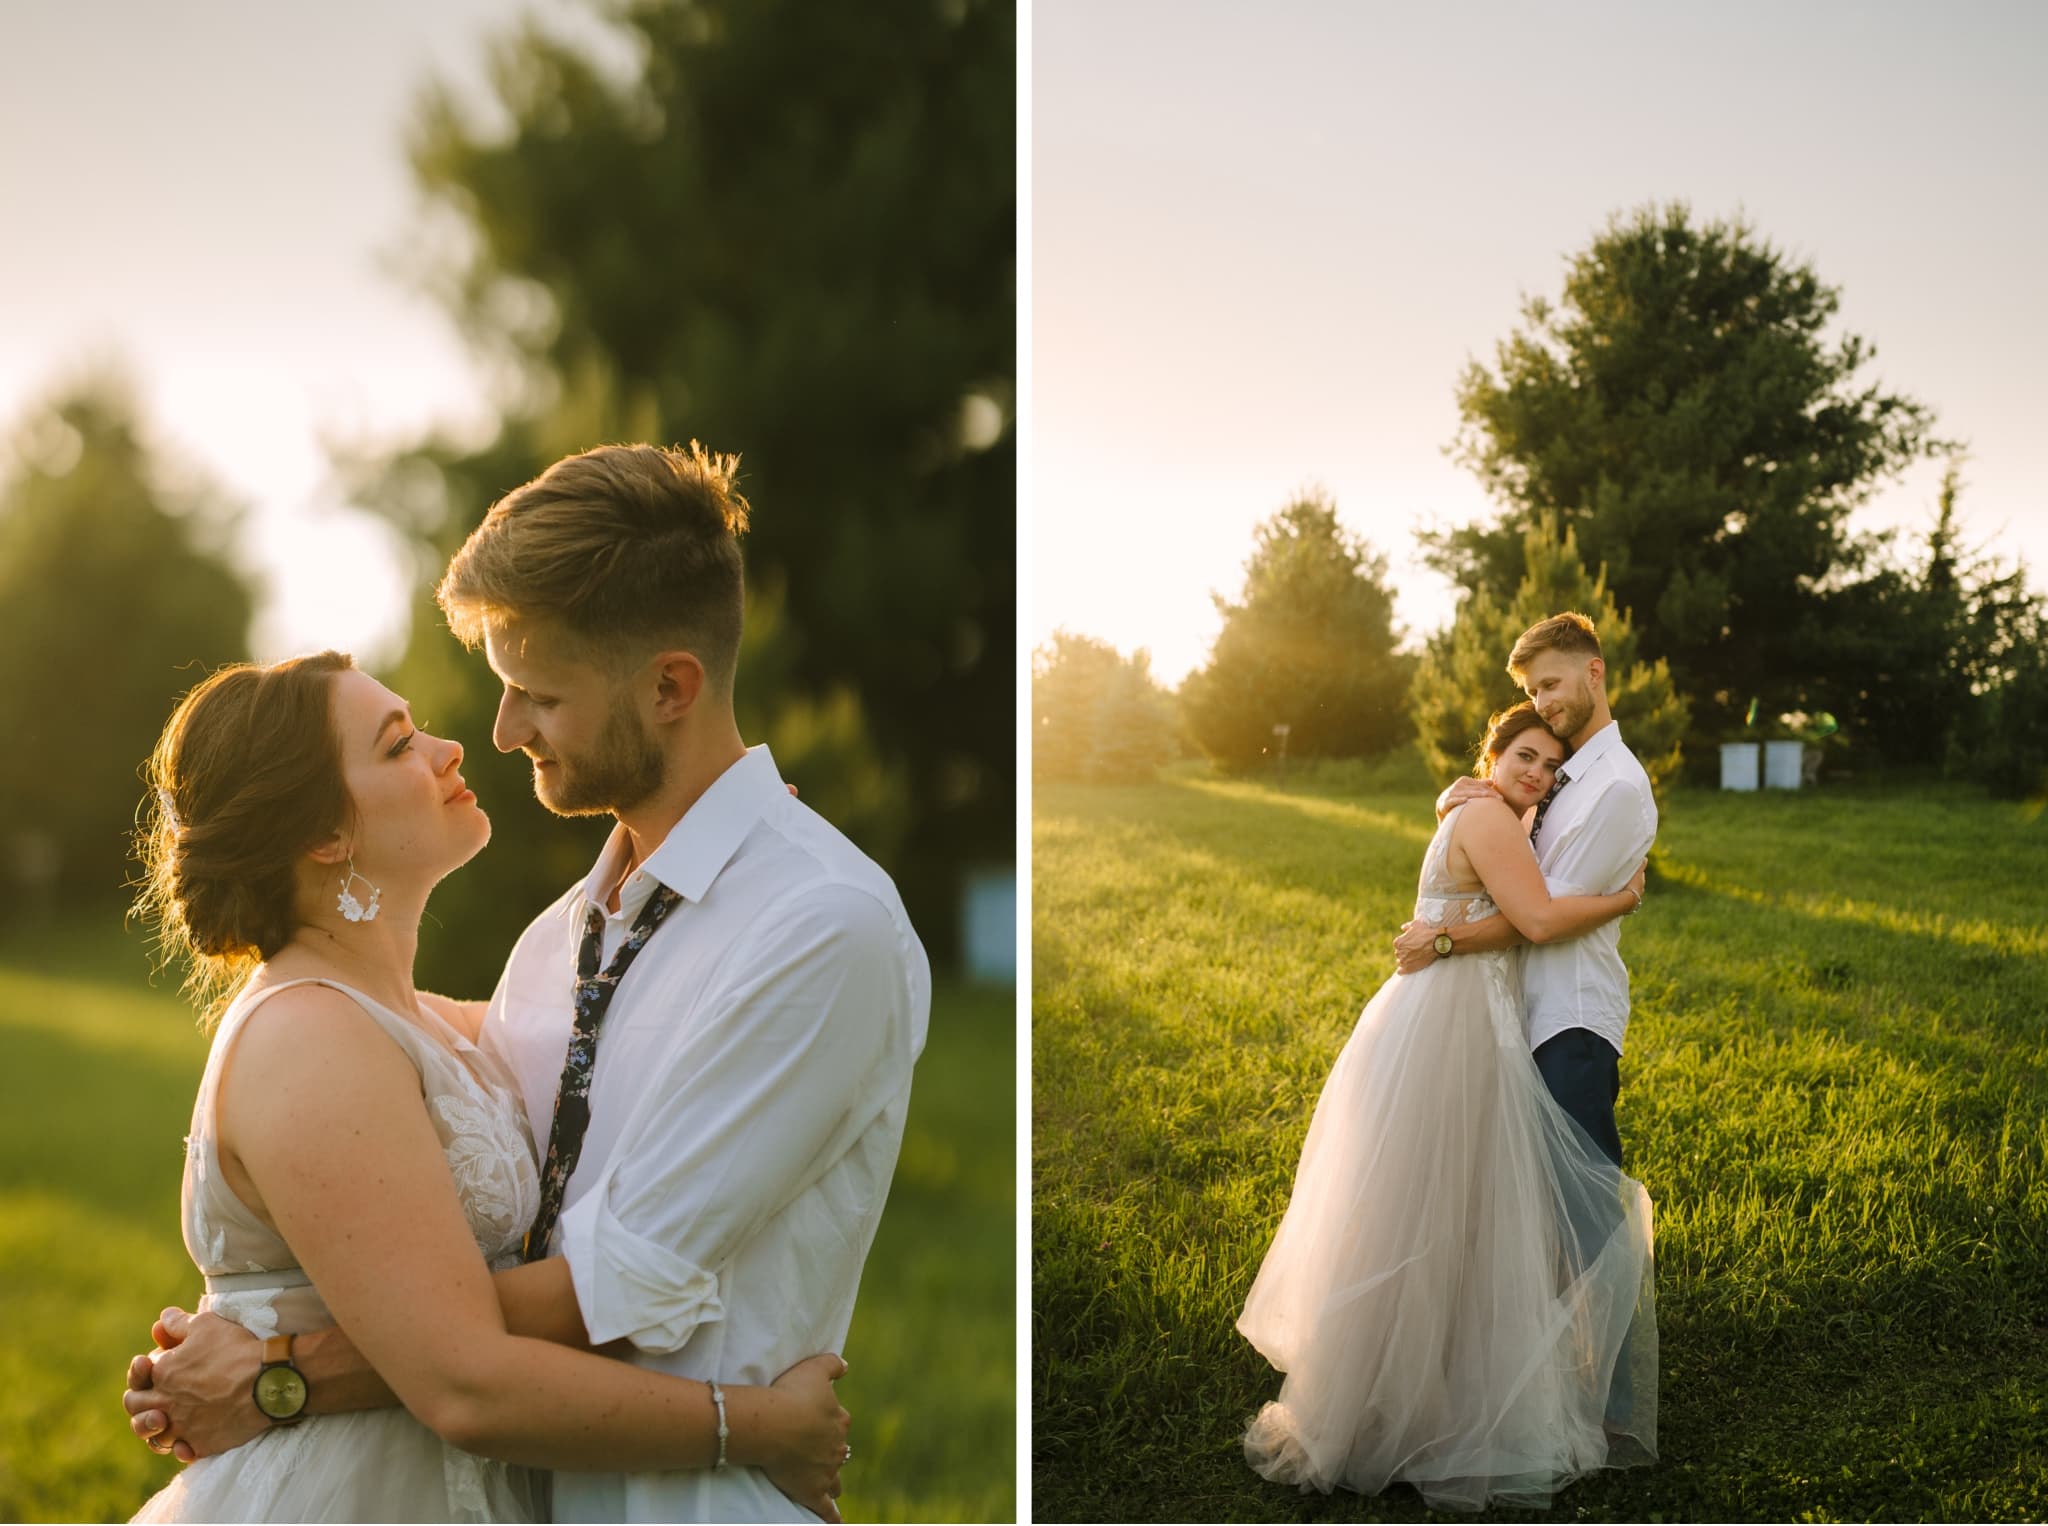 newlyweds embrace in green field at sunset